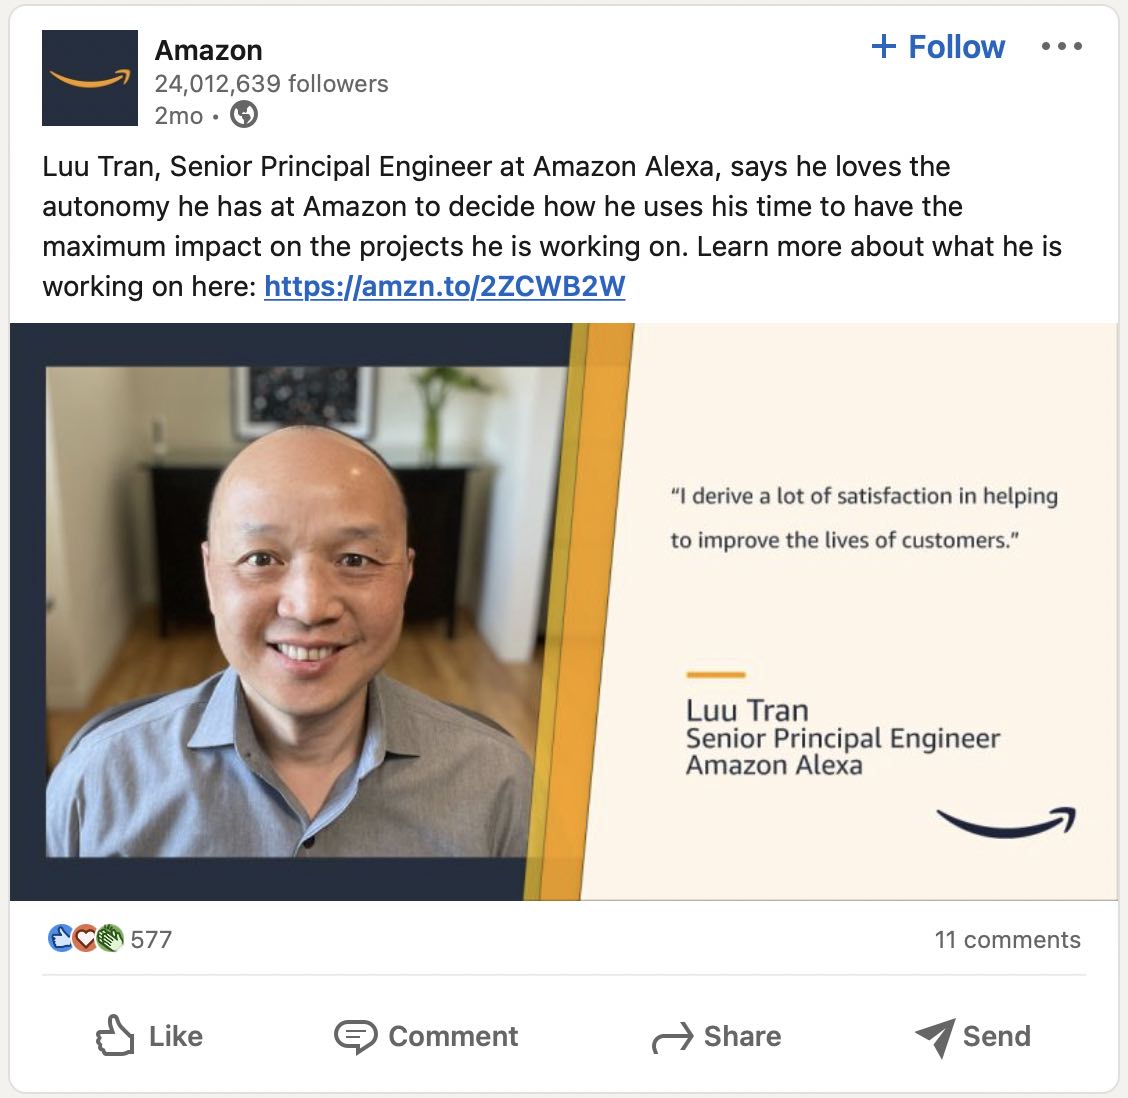 Screenshot of Amazon's LinkedIn page with an image of a male engineer-employee